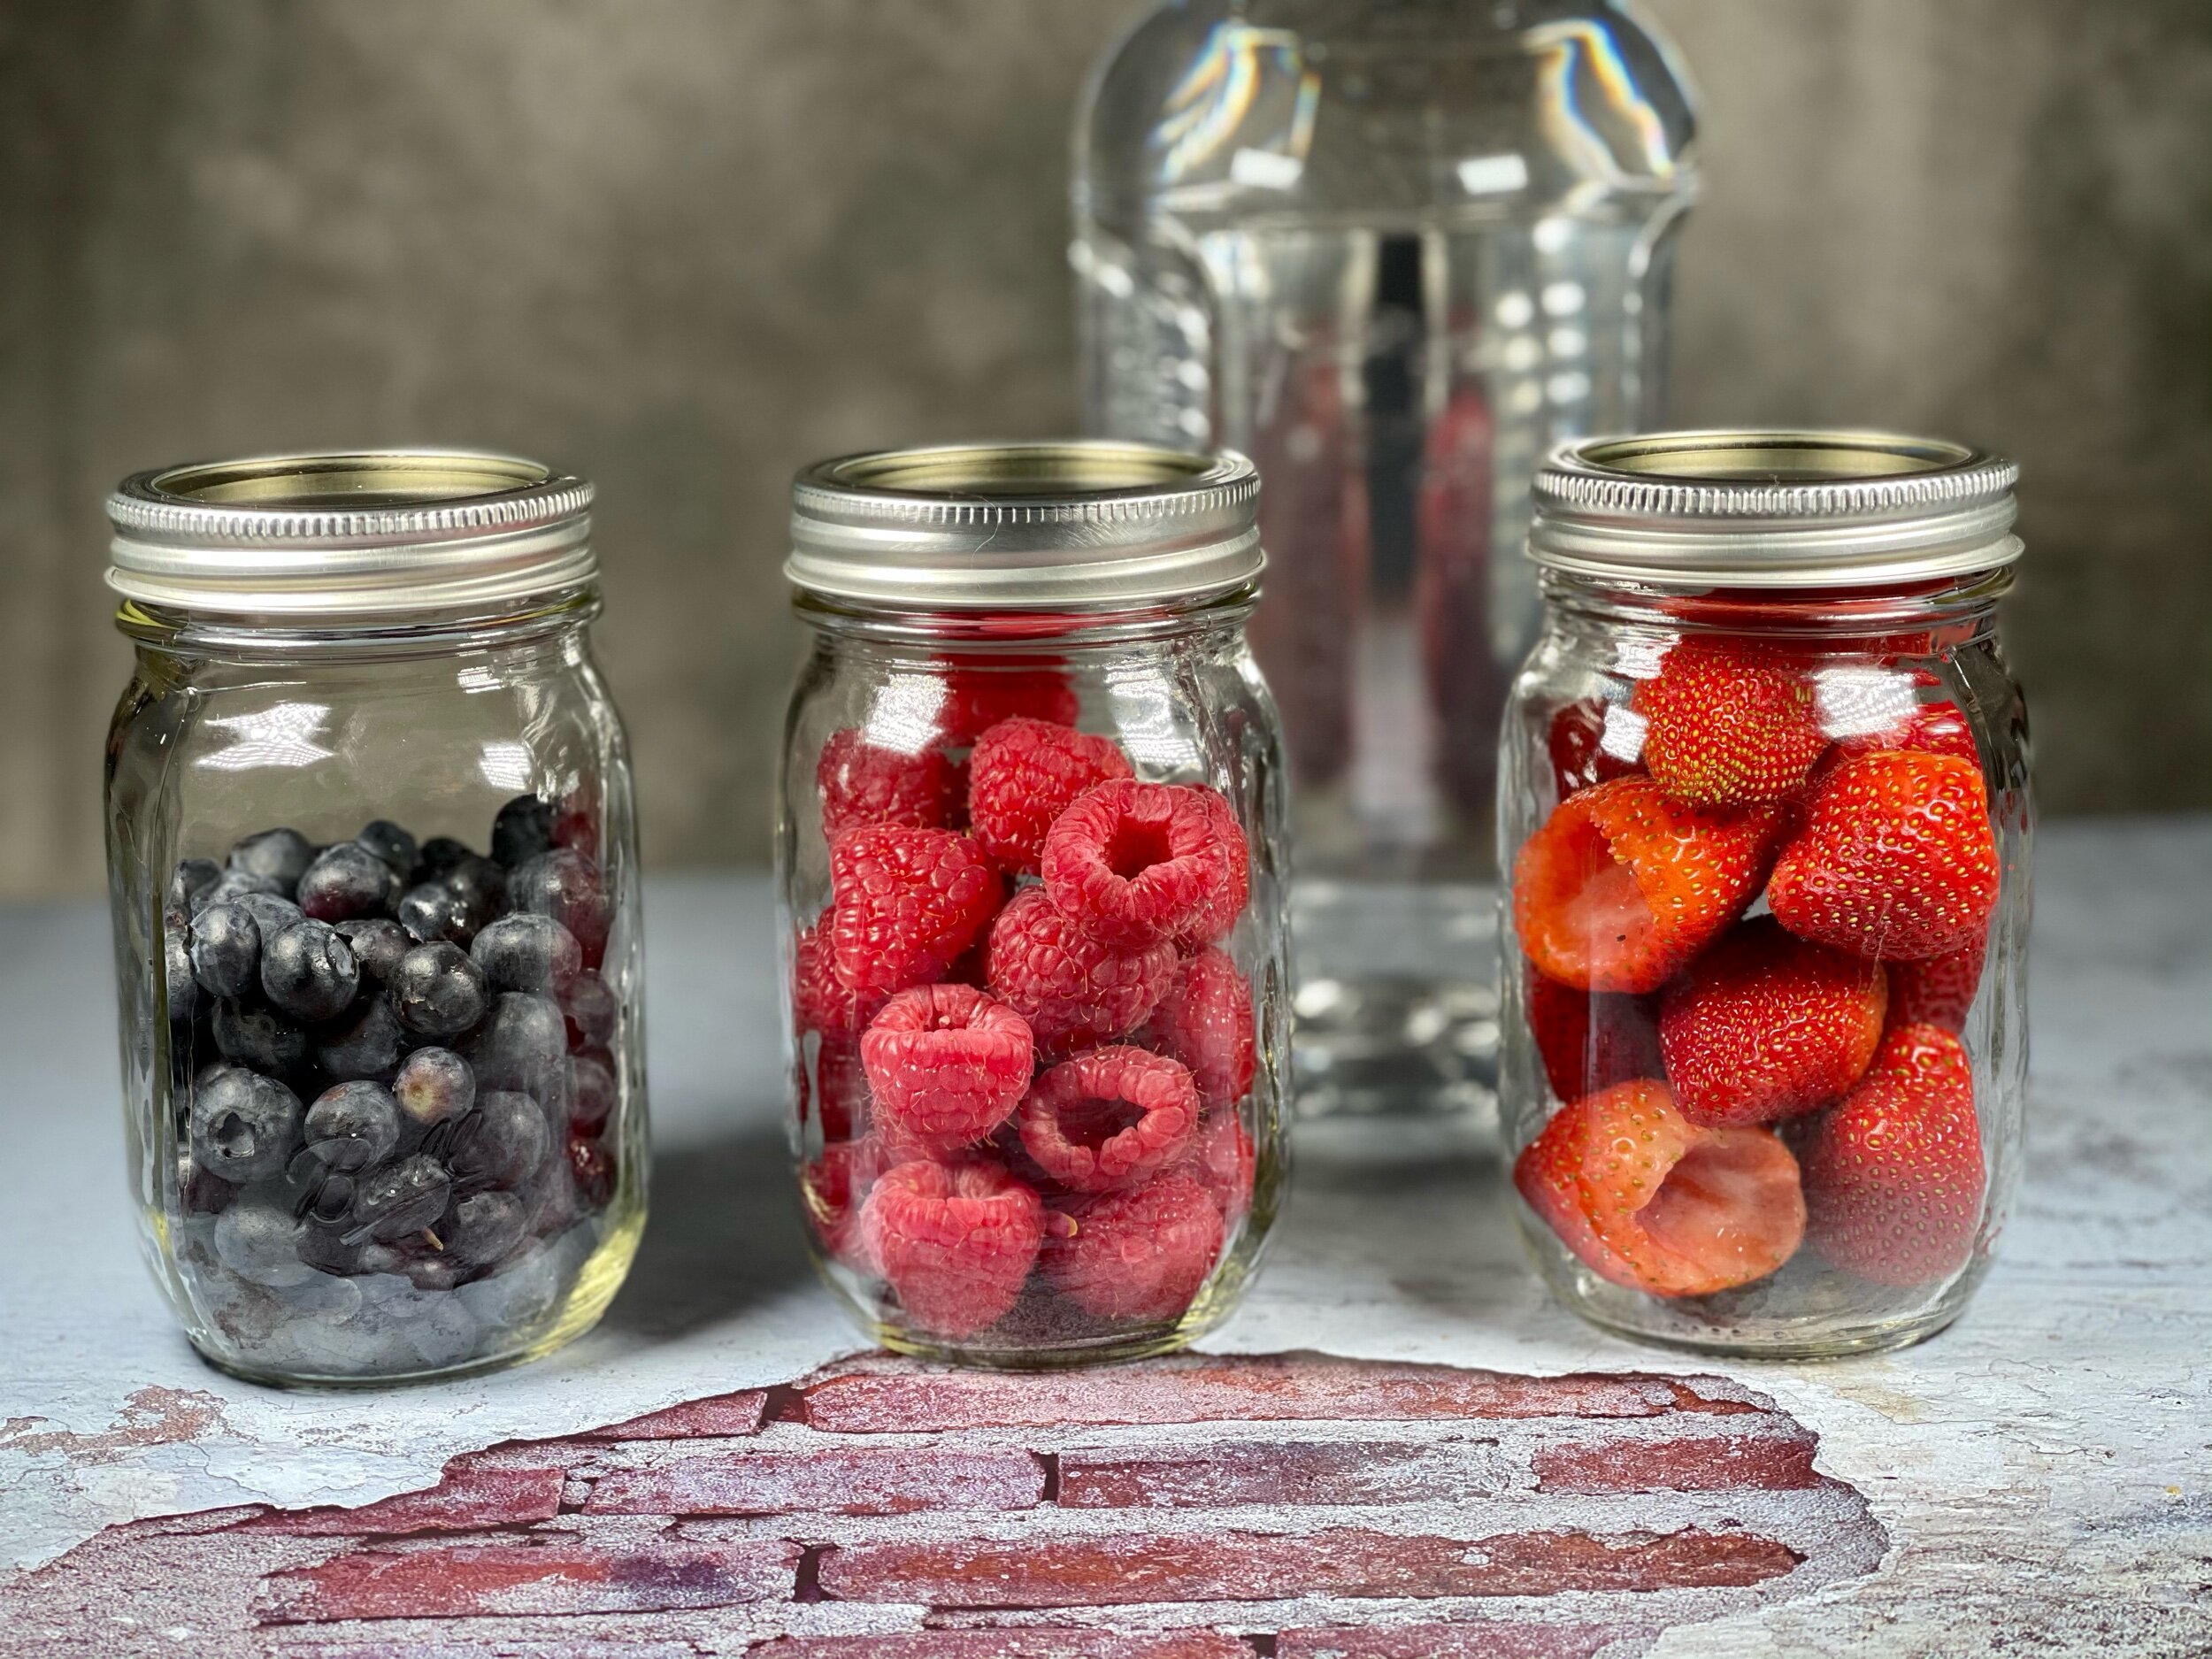  Left to right close up of a jar of blueberries , raspberries , and strawberries with a bottle of vodka placed behind the jars. 